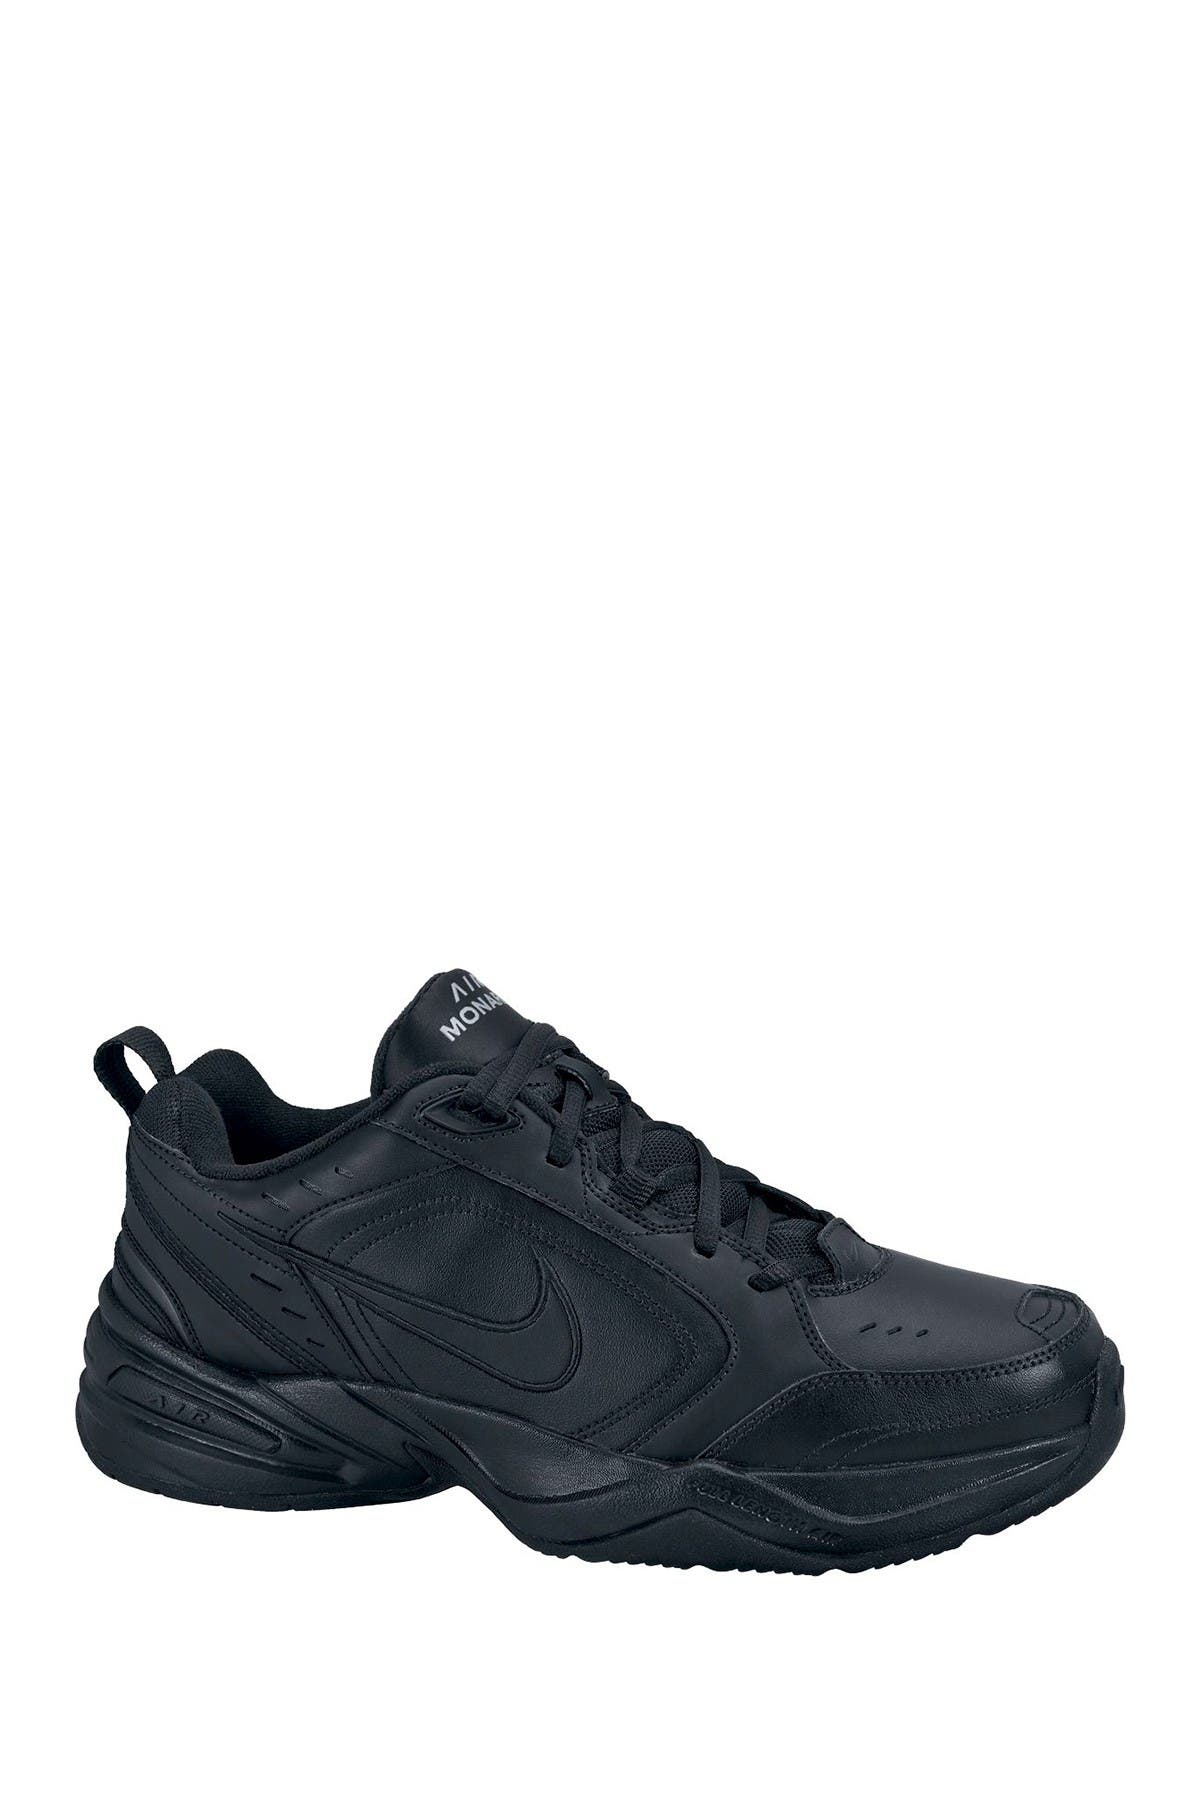 nike men's air monarch iv 4e extra wide width shoes